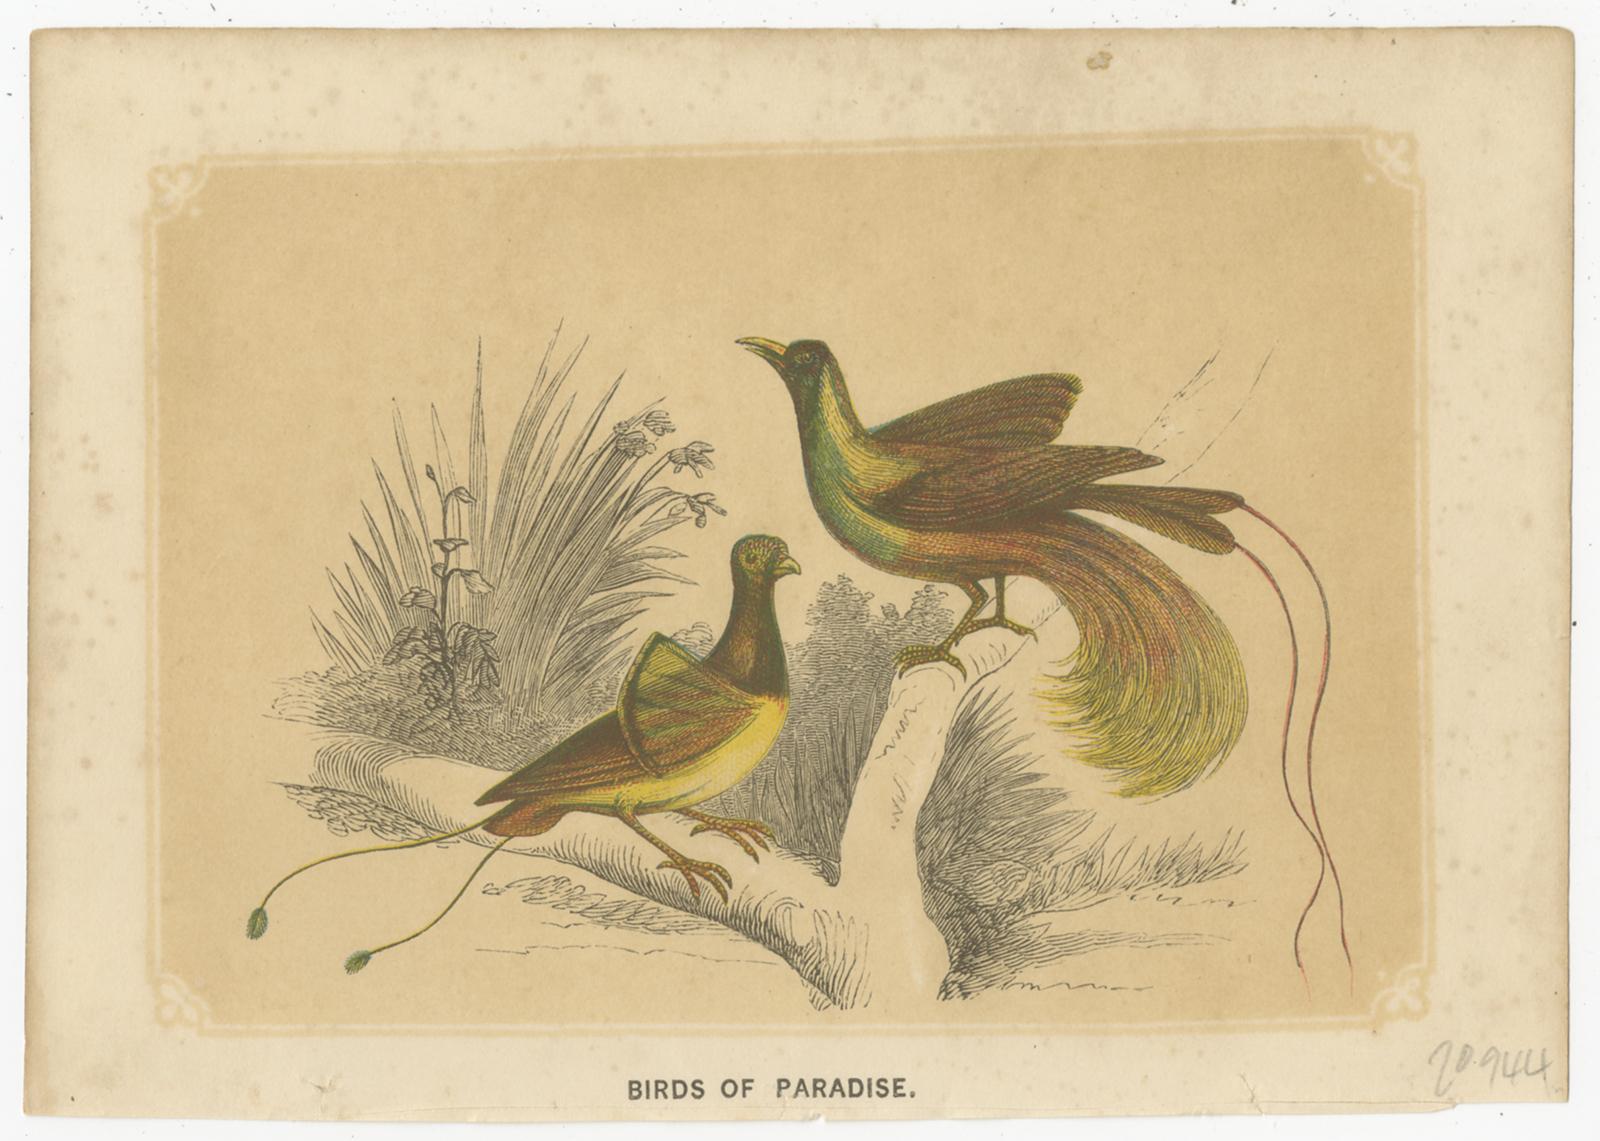 Set of two antique bird prints titled 'Birds of Paradise' and 'Great Emeral Bird of Paradise'. These prints originate from 'The Natural History of The Sacred Scriptures, and Guide to General Zoology' by W. I. Bicknell. Published 1851-1860.